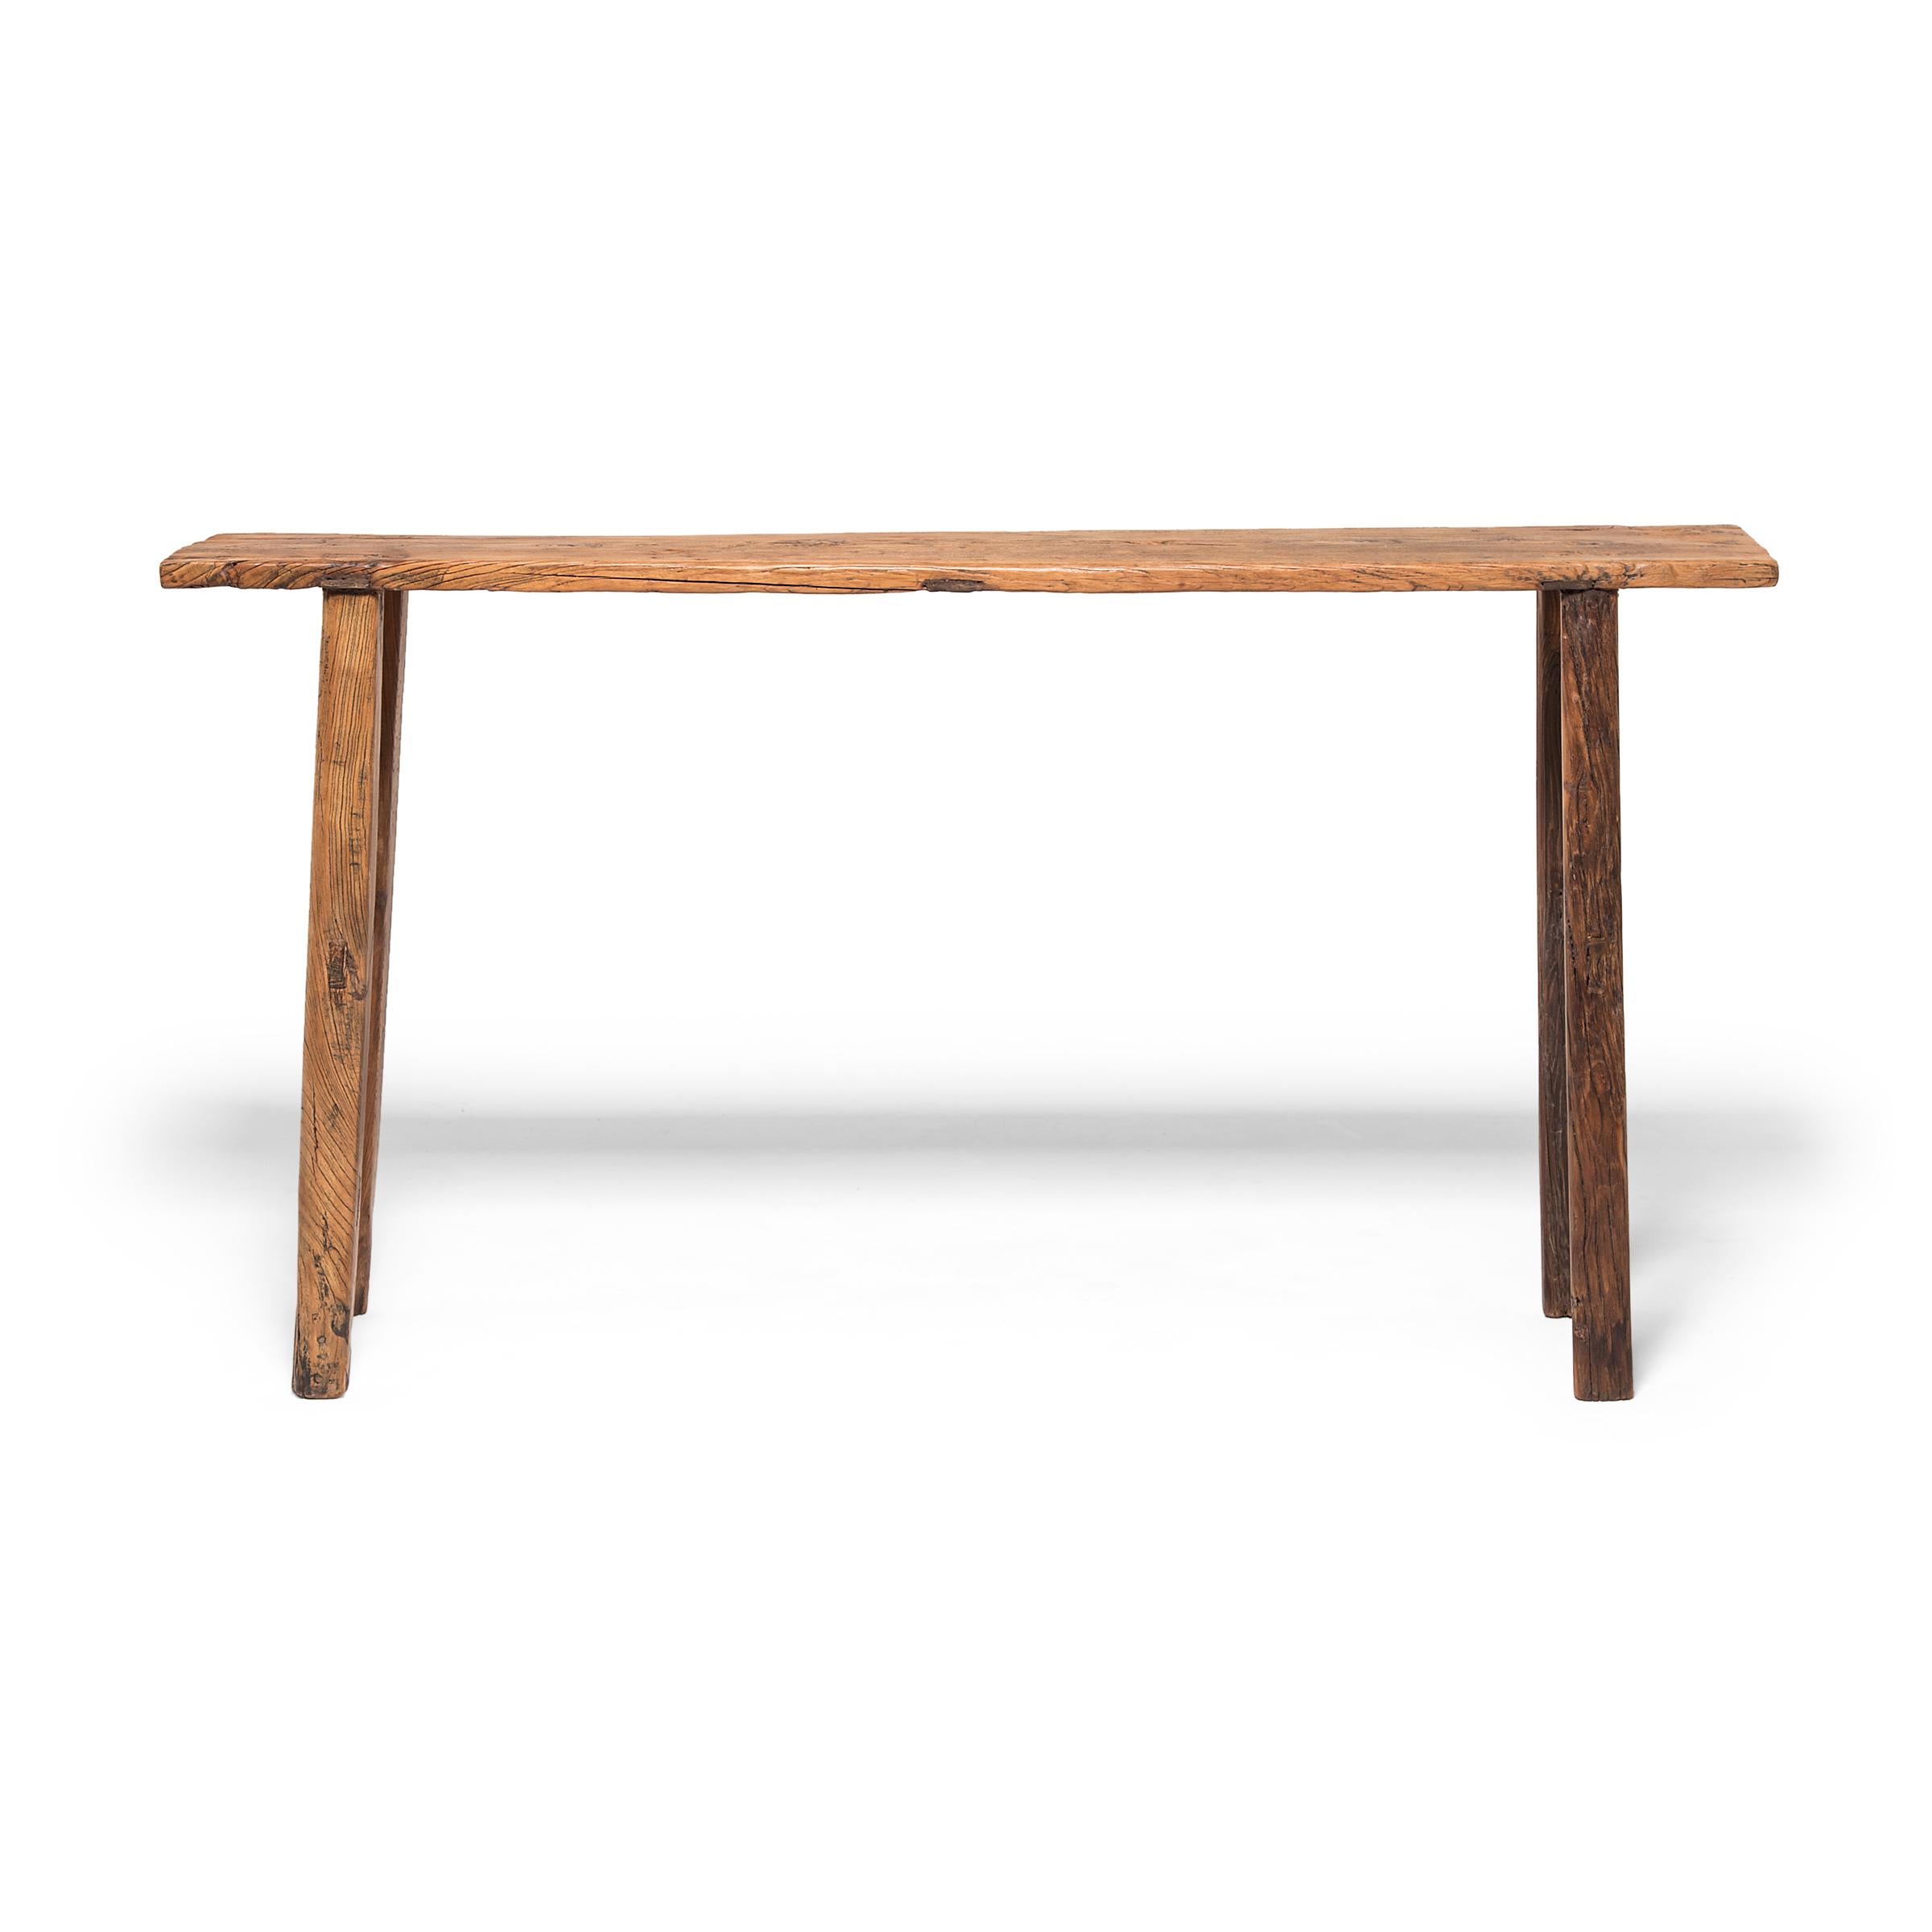 This solid plank top table, known in colloquial Mandarin as 